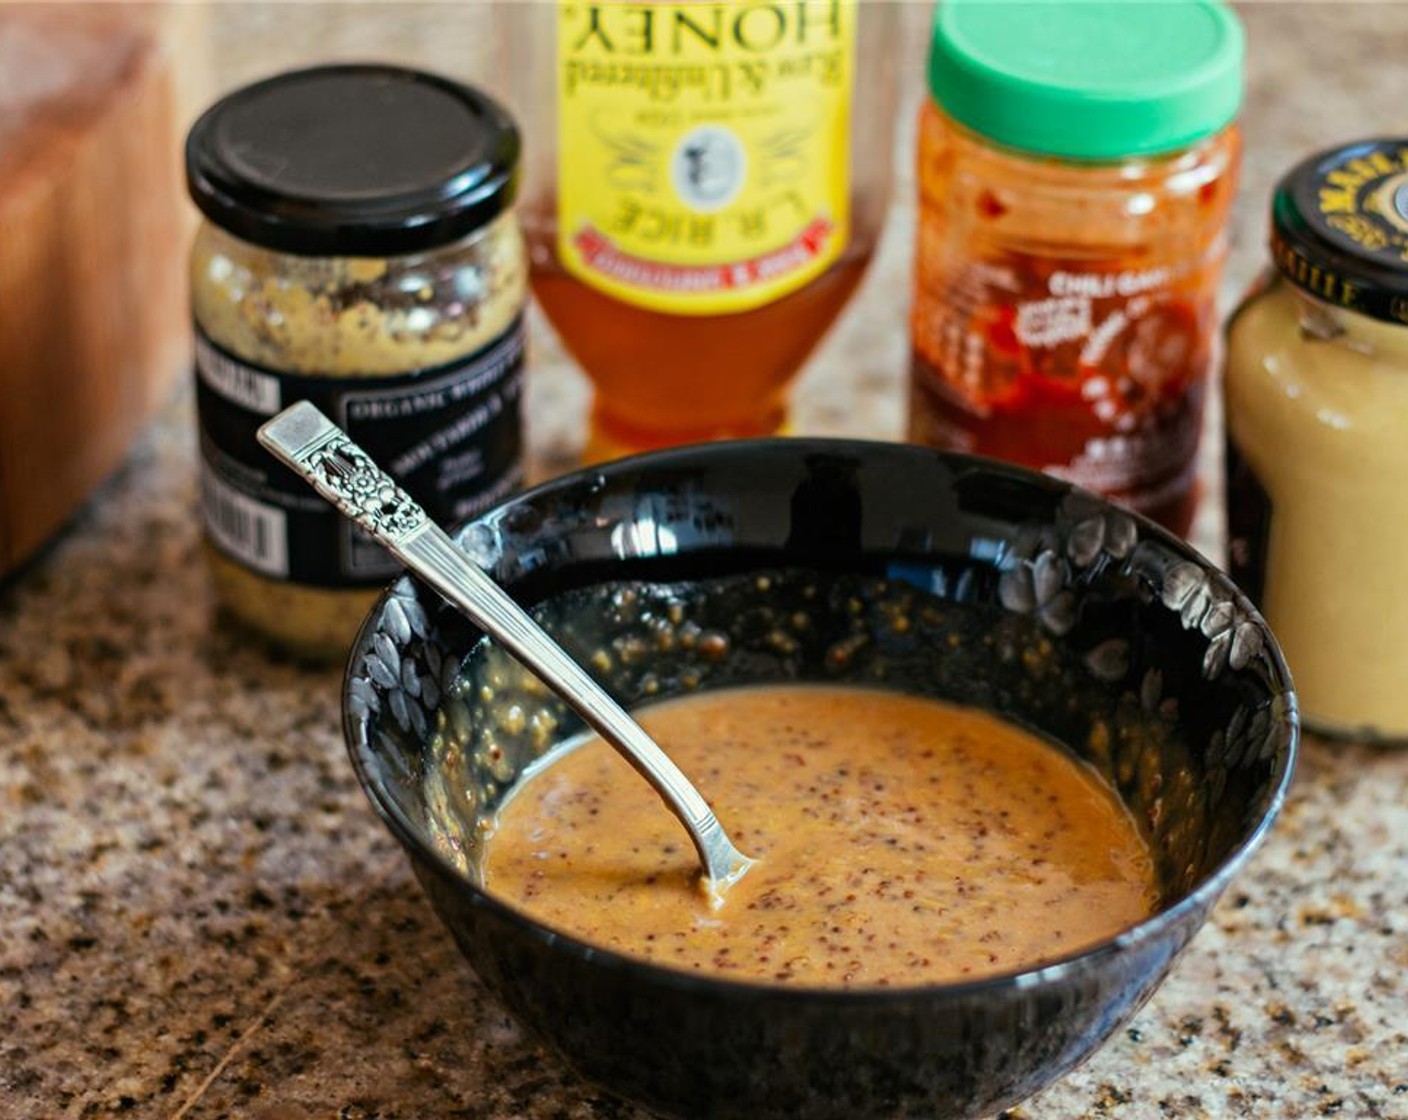 step 5 In a small bowl, whisk together the Whole Grain Mustard (2 Tbsp), Dijon Mustard (2 Tbsp), Honey (1/4 cup), and Chili Garlic Sauce (1 tsp).